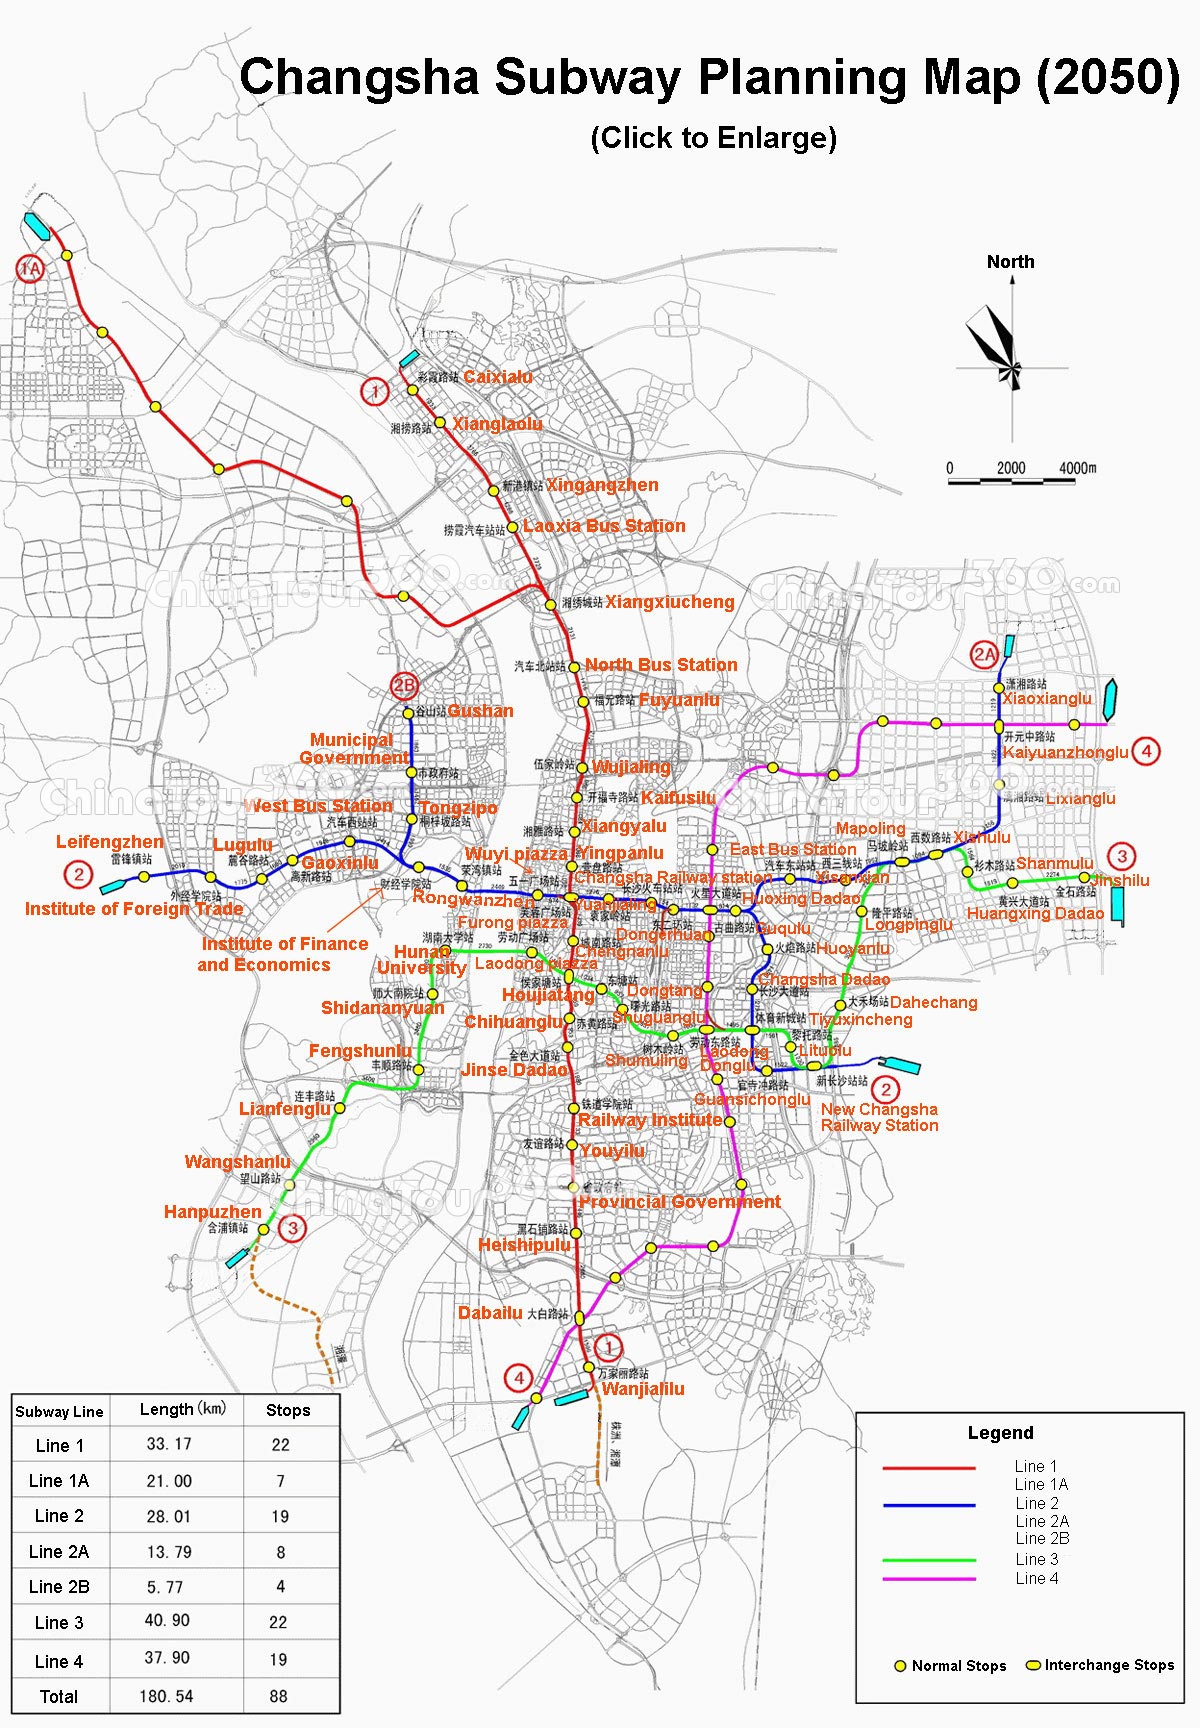 Public Transit in Changsha: Current State and Avenues for Improvement